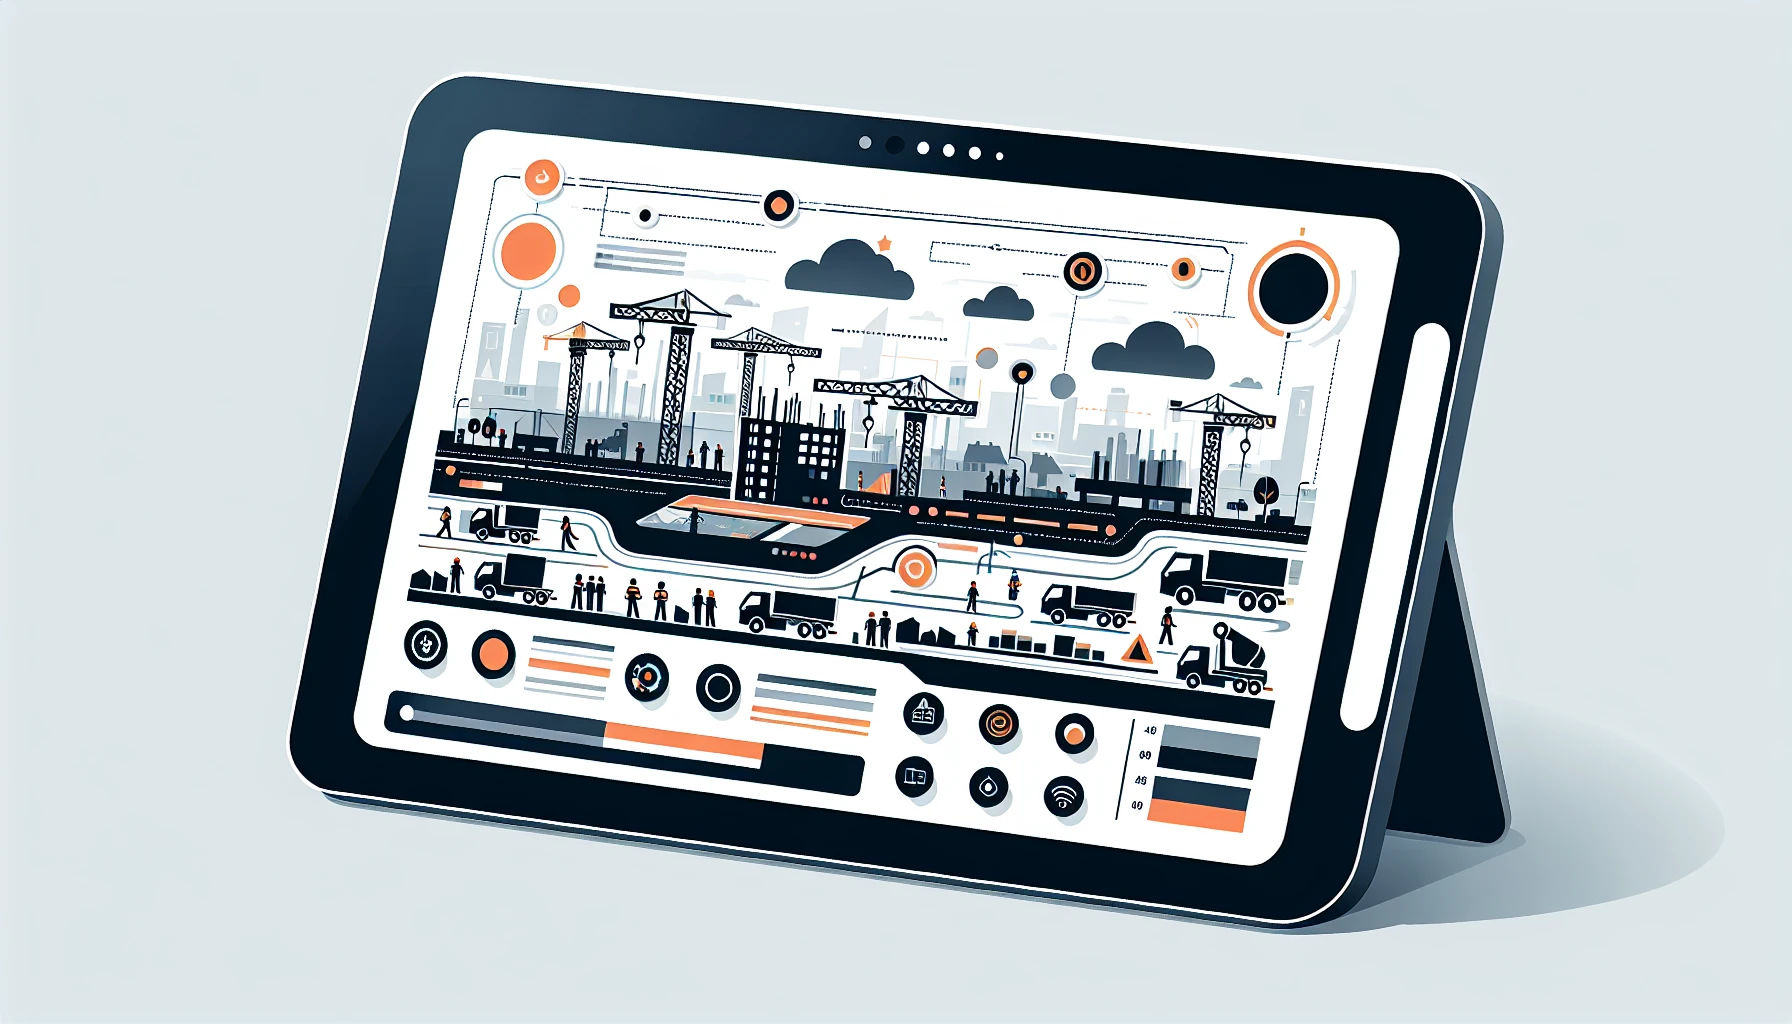 Construction site management system interface on a tablet